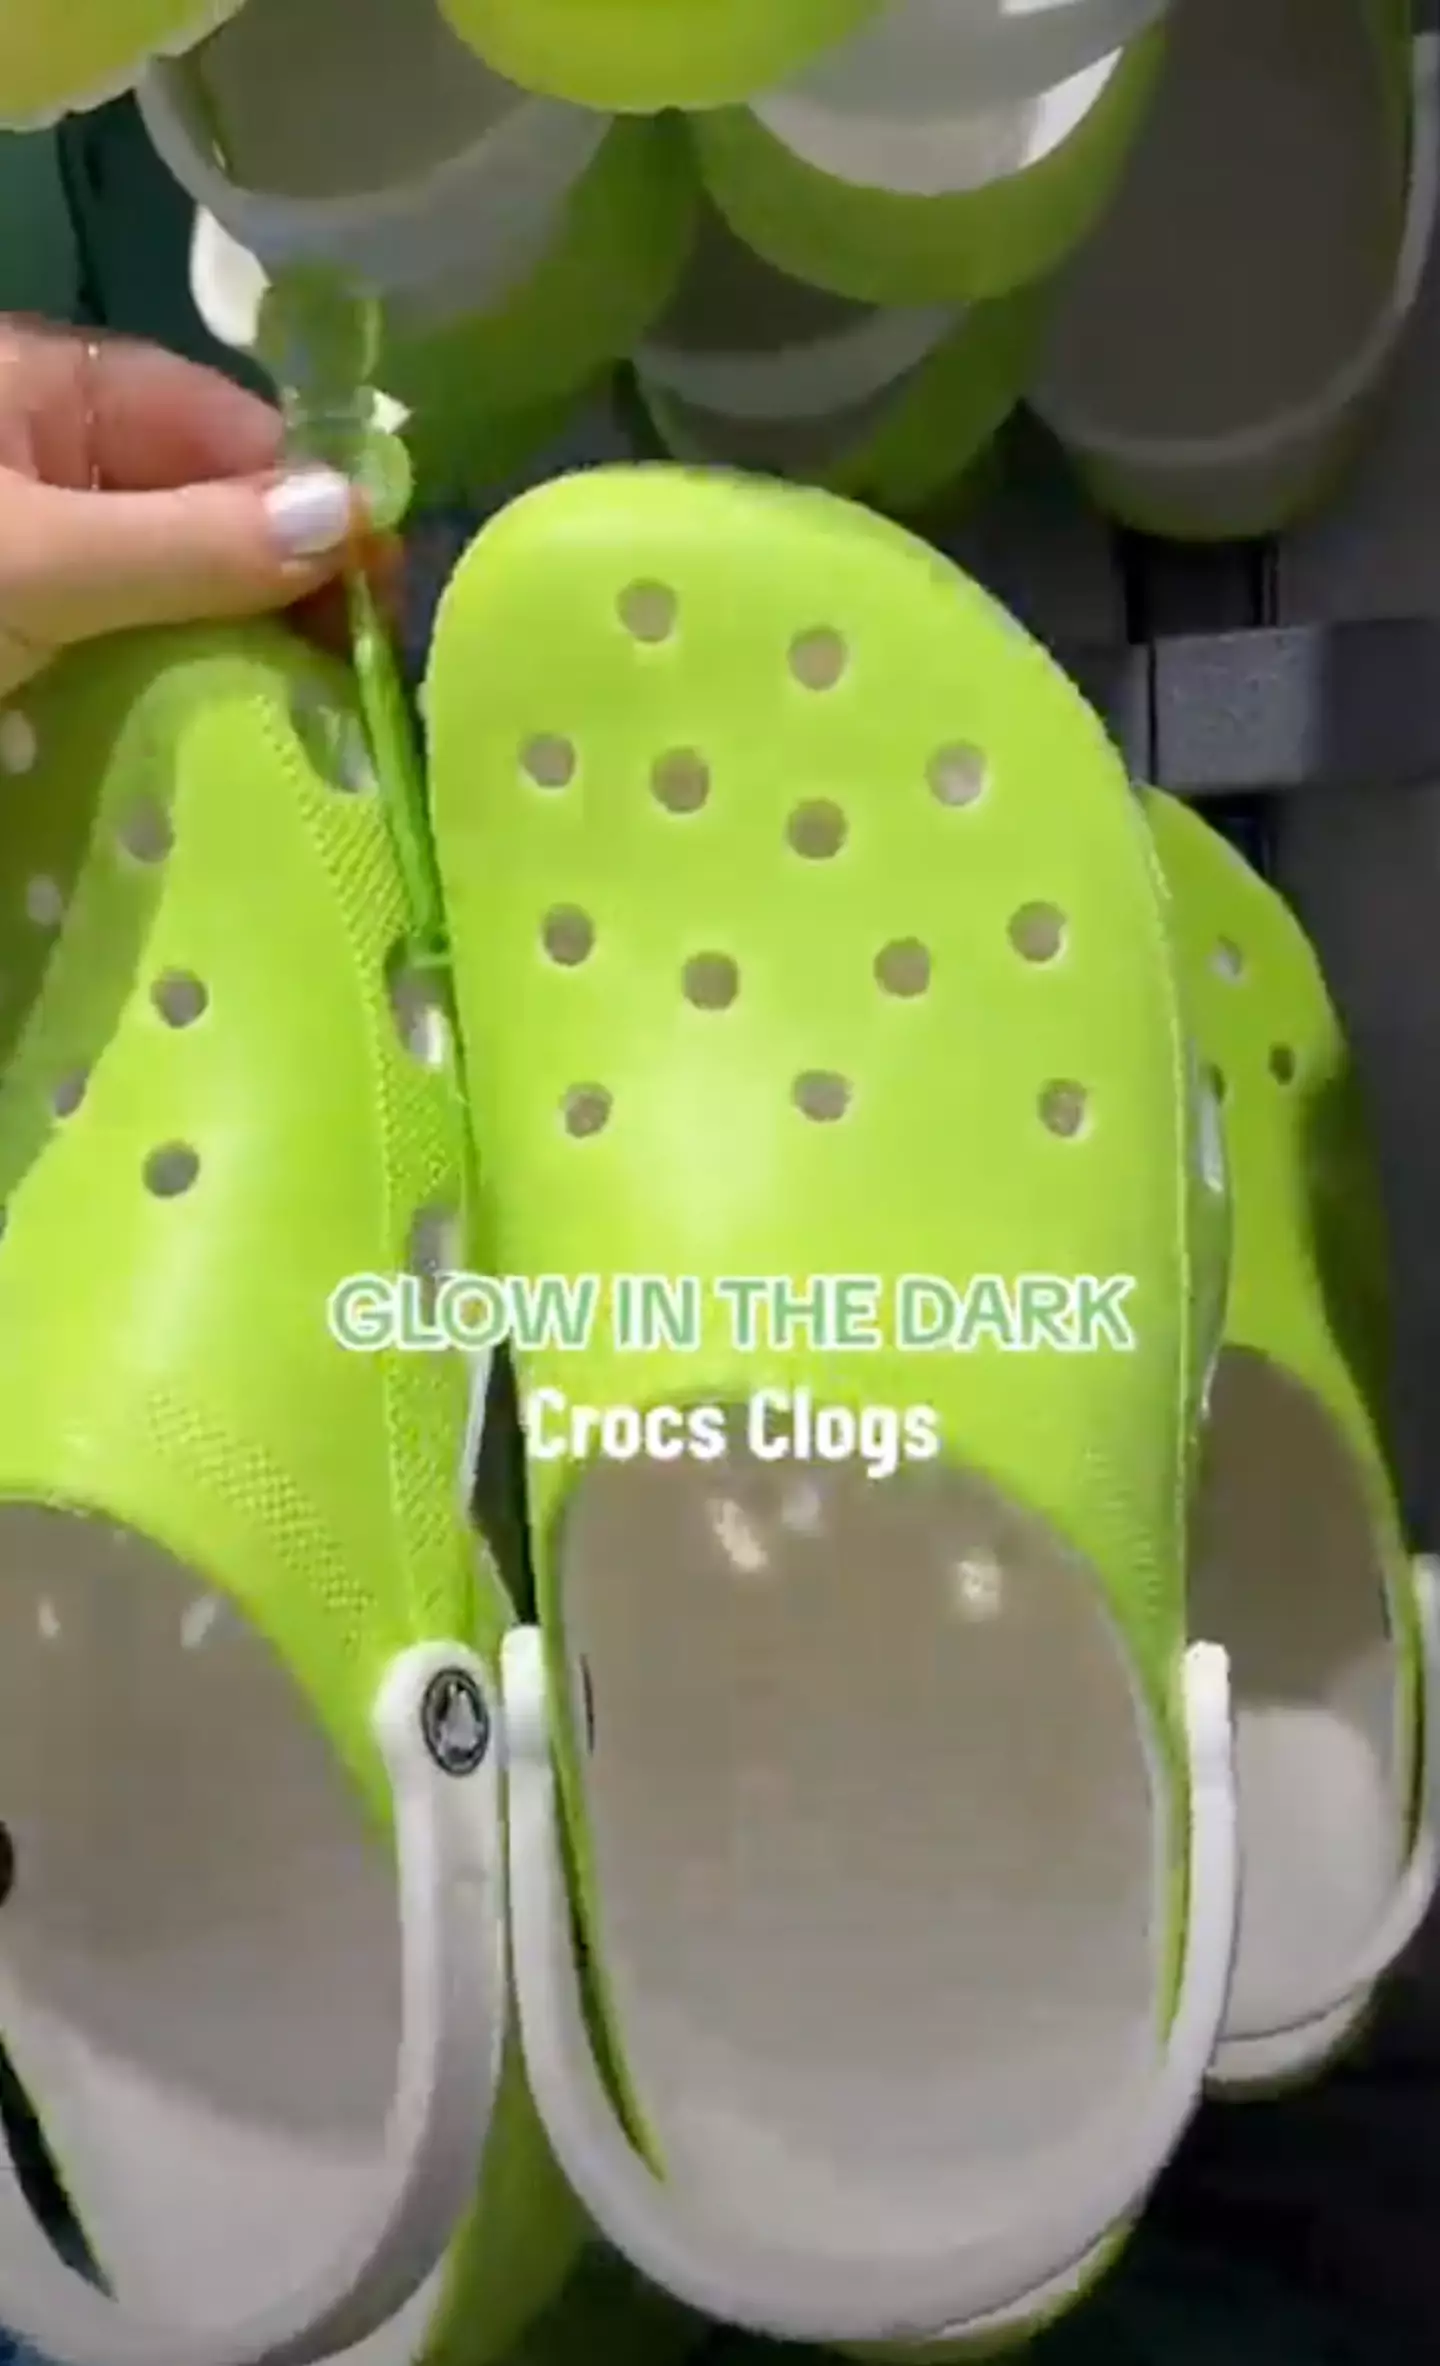 With the lights on, they look like a normal pair of Crocs...